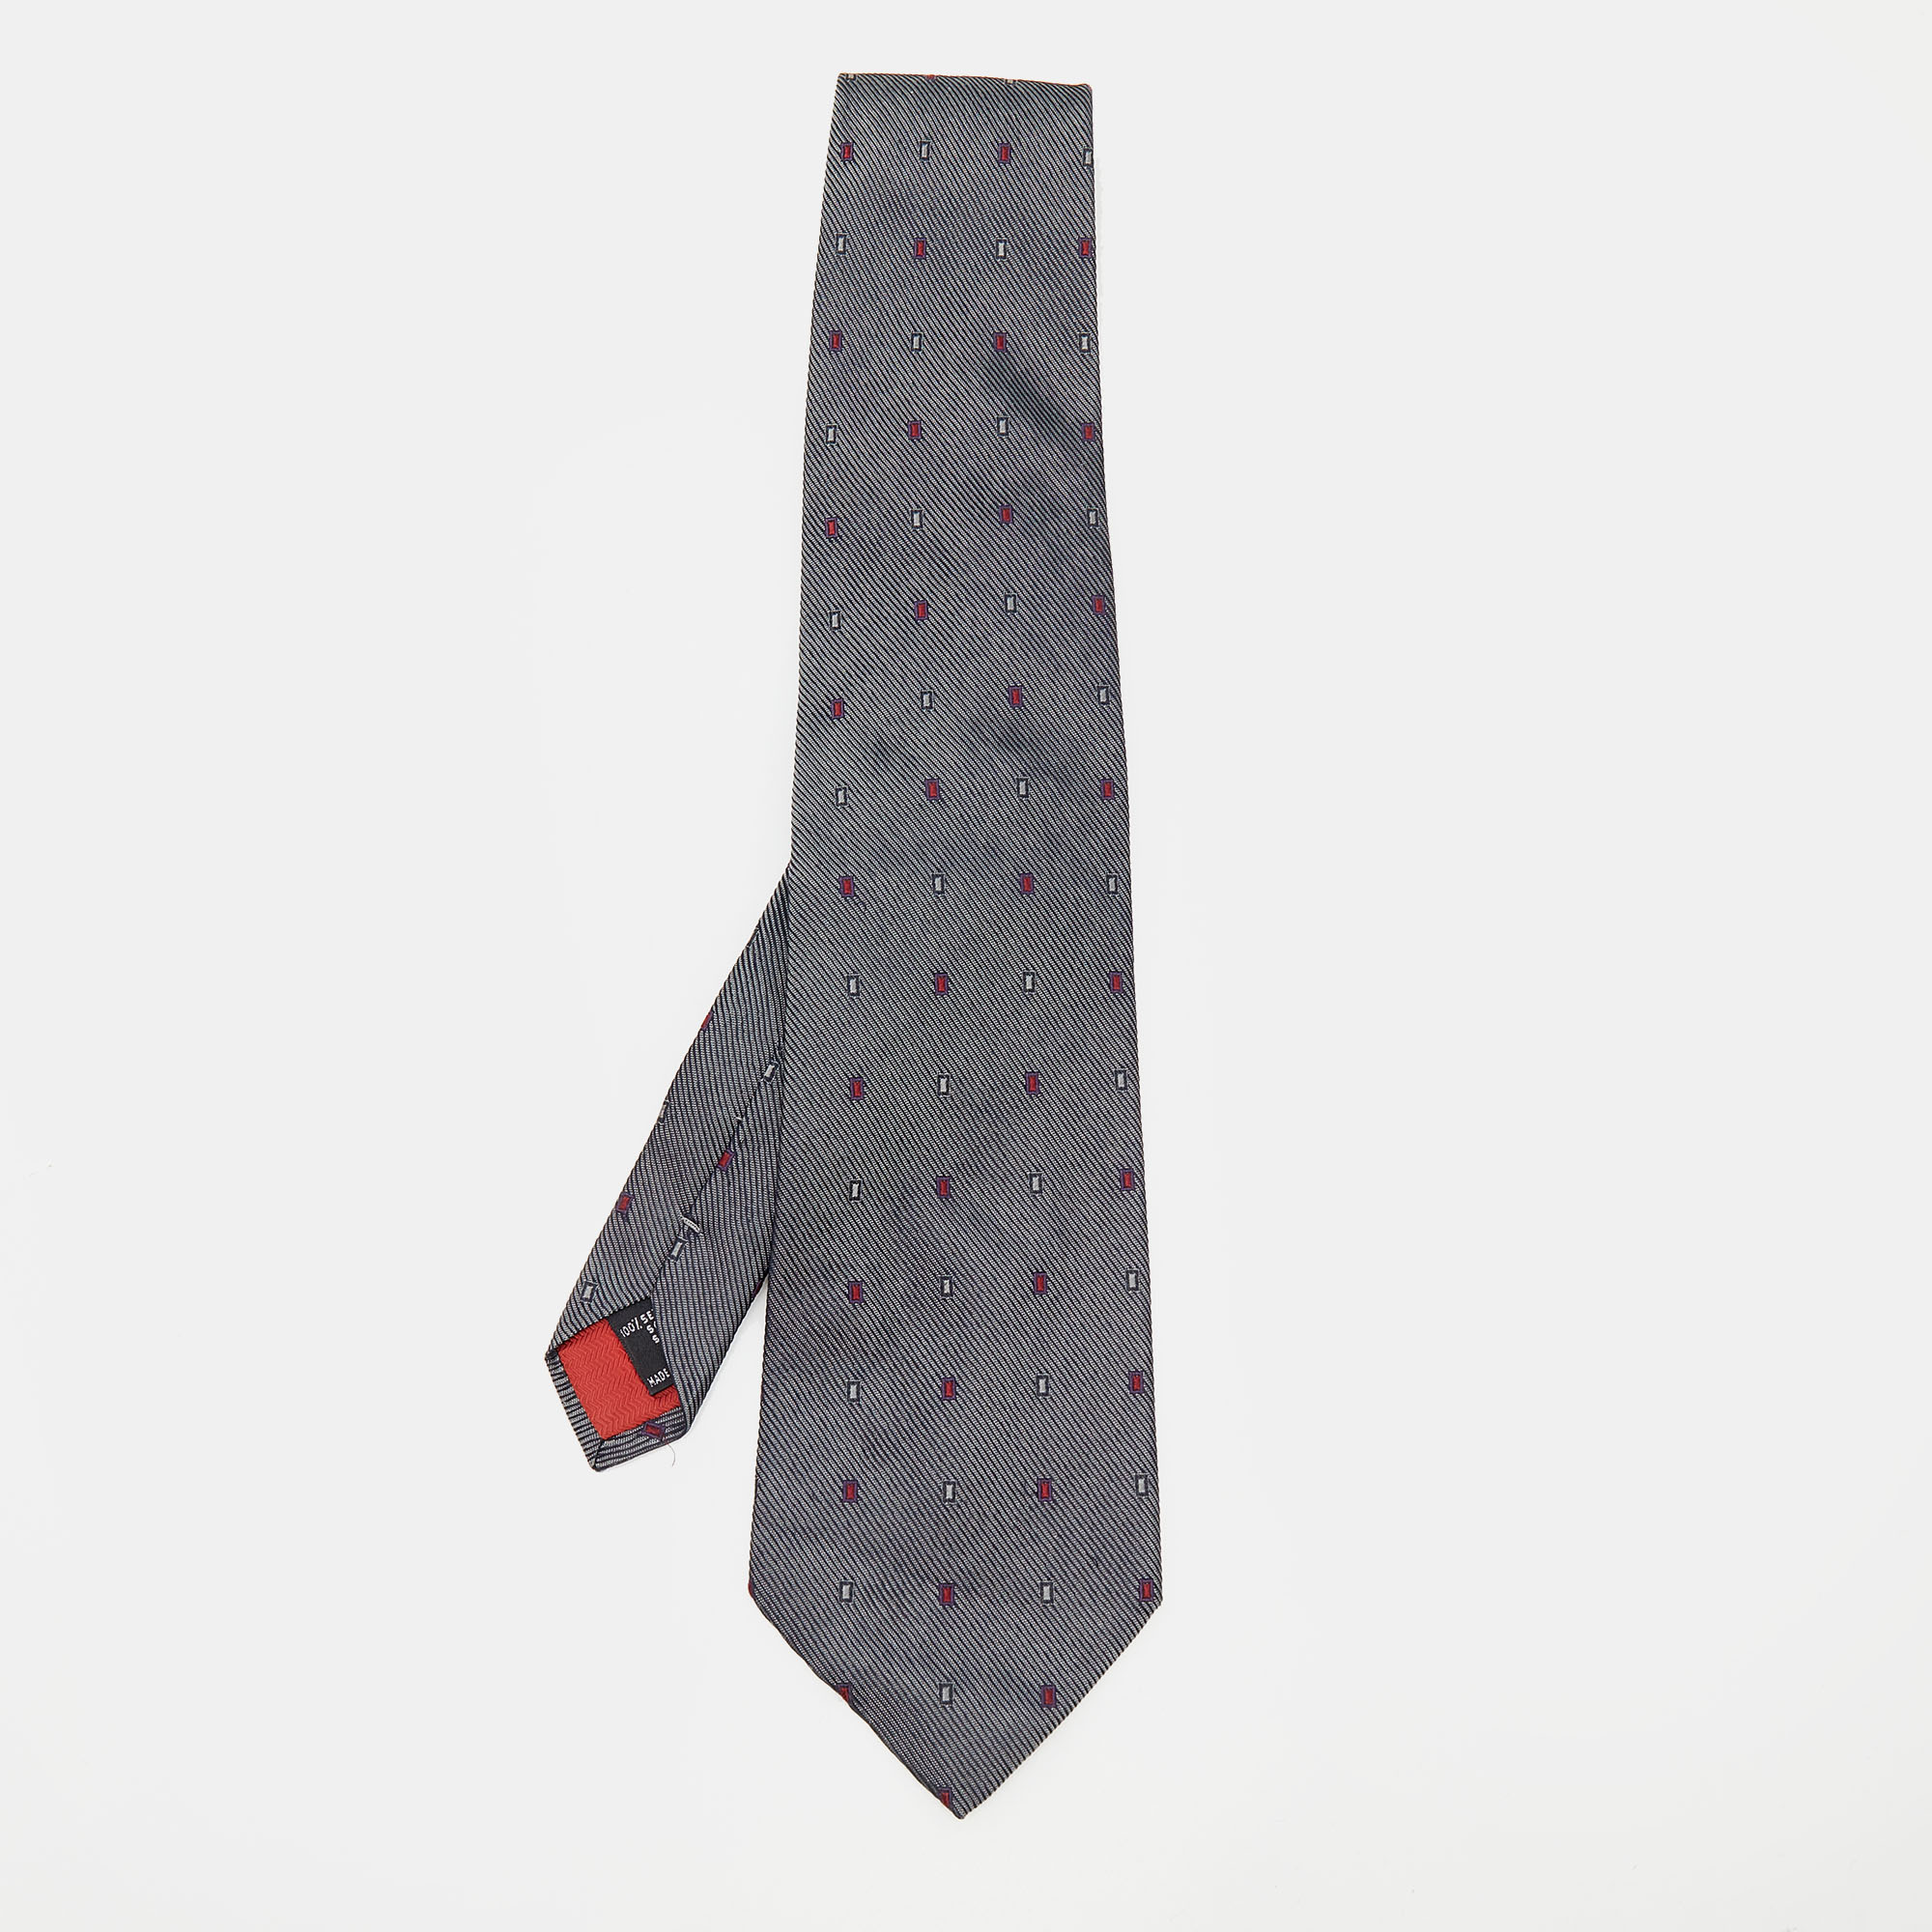 

S.T. Dupont Charcoal Grey Jacquard Silk Tie